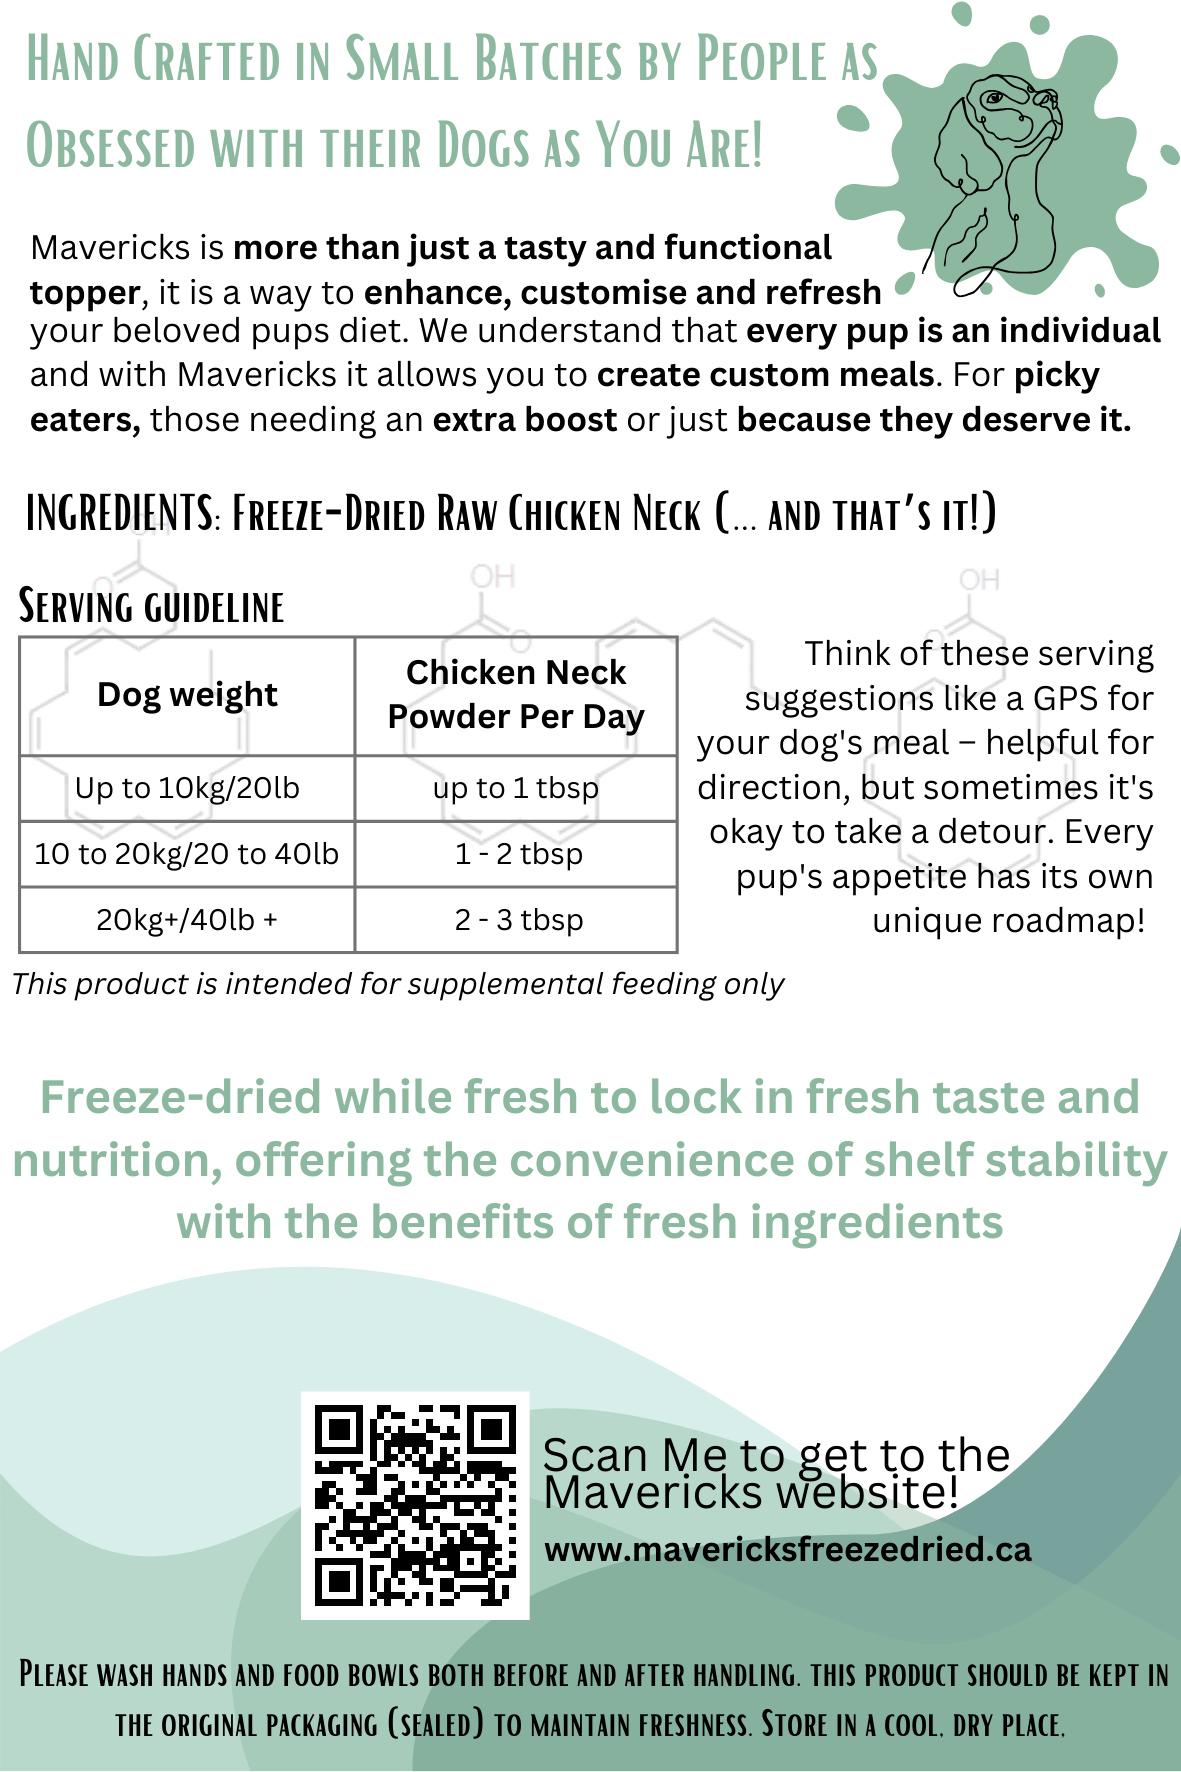 Freeze Dried Chicken Neck Powder for Dogs - Joint Support Dog Food Topper